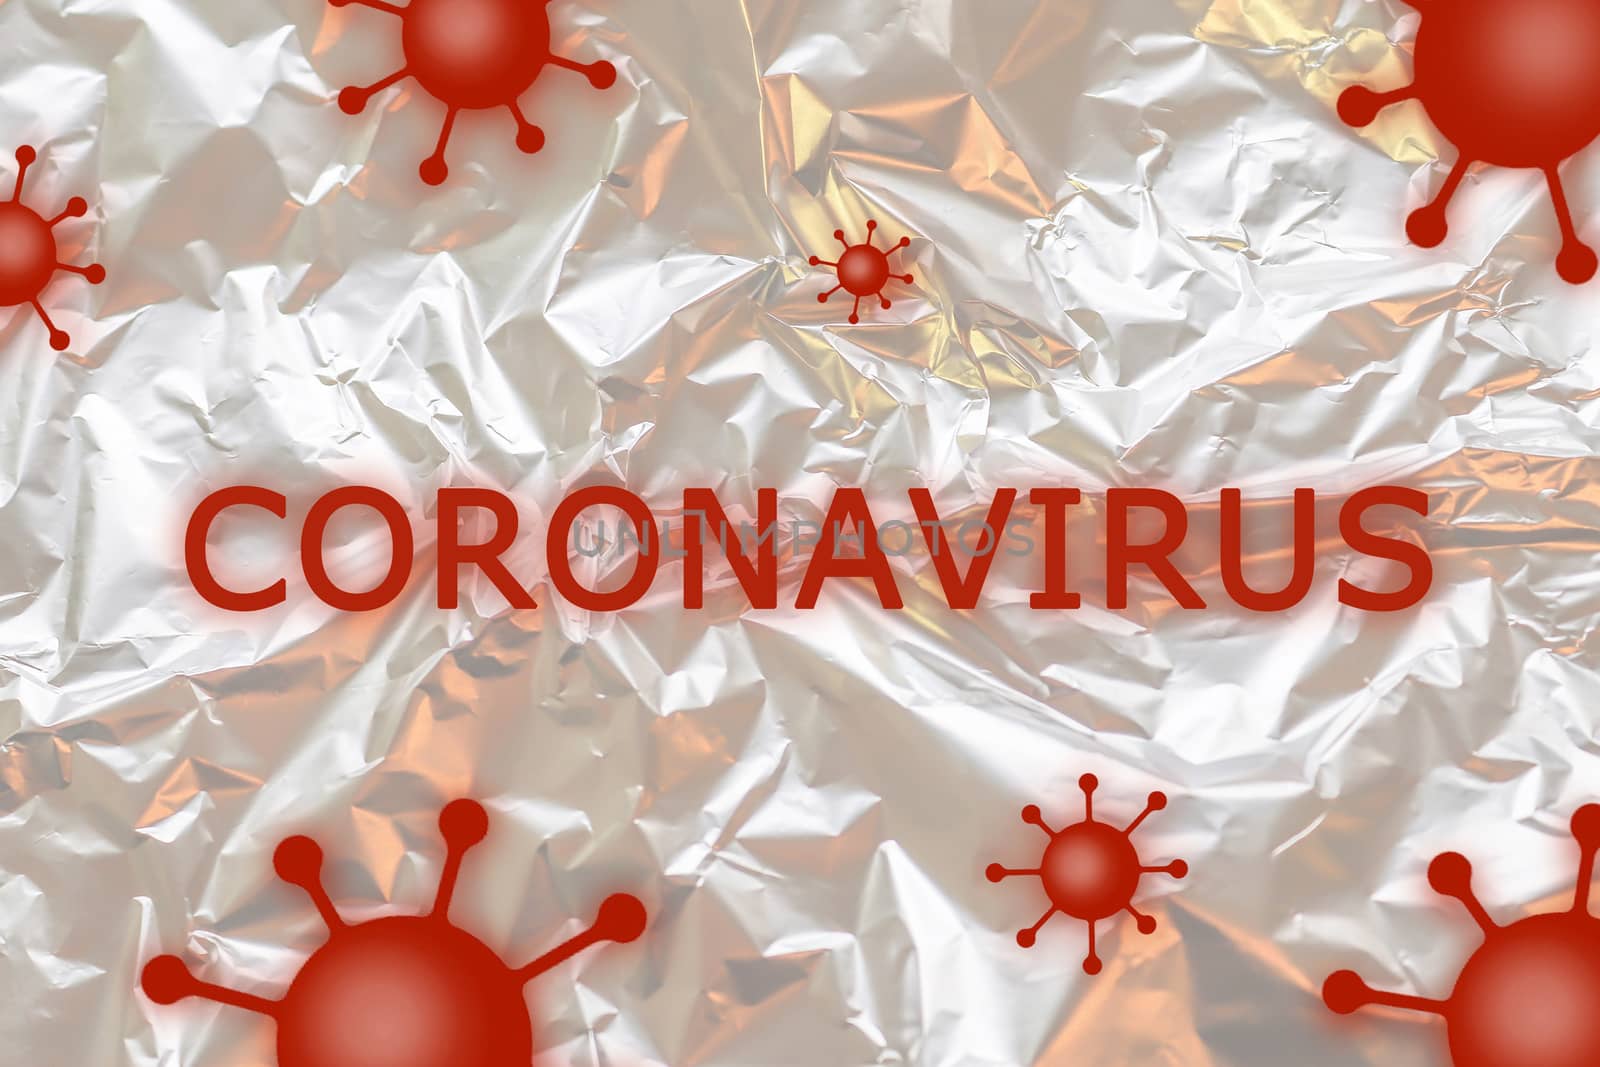 3D-Illustration of COVID-19 and coronavirus texts on a white bac by MP_foto71